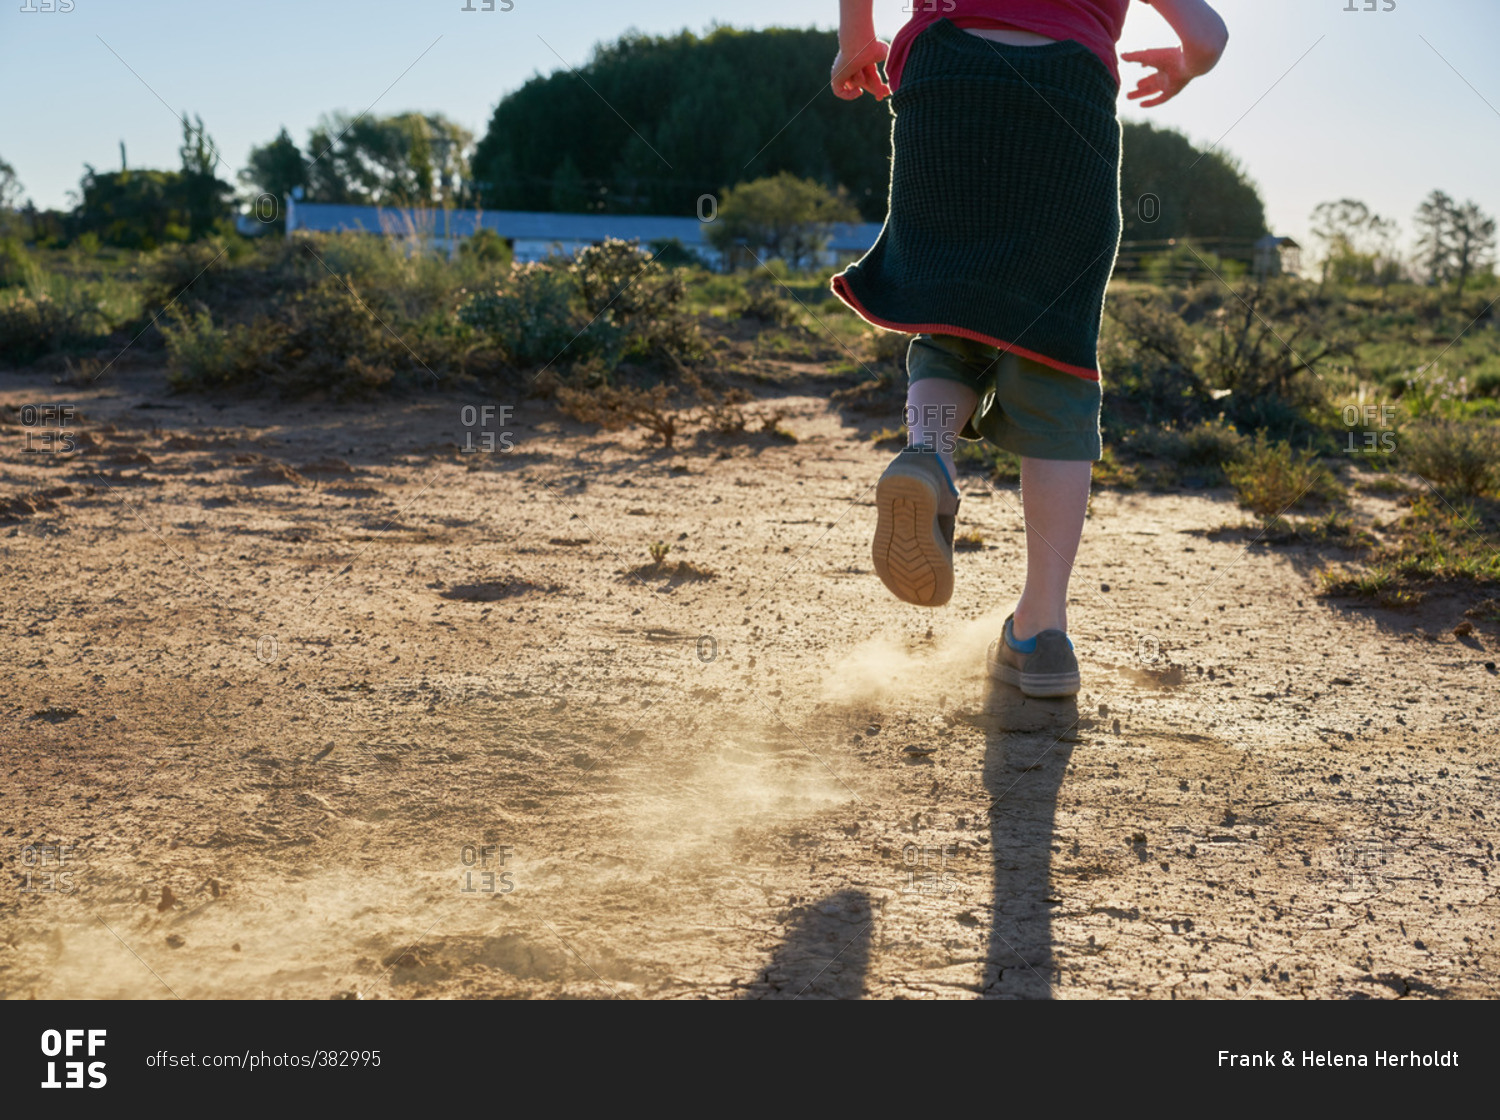 Boy kicking up dirt on a dirt patch in a scrubland